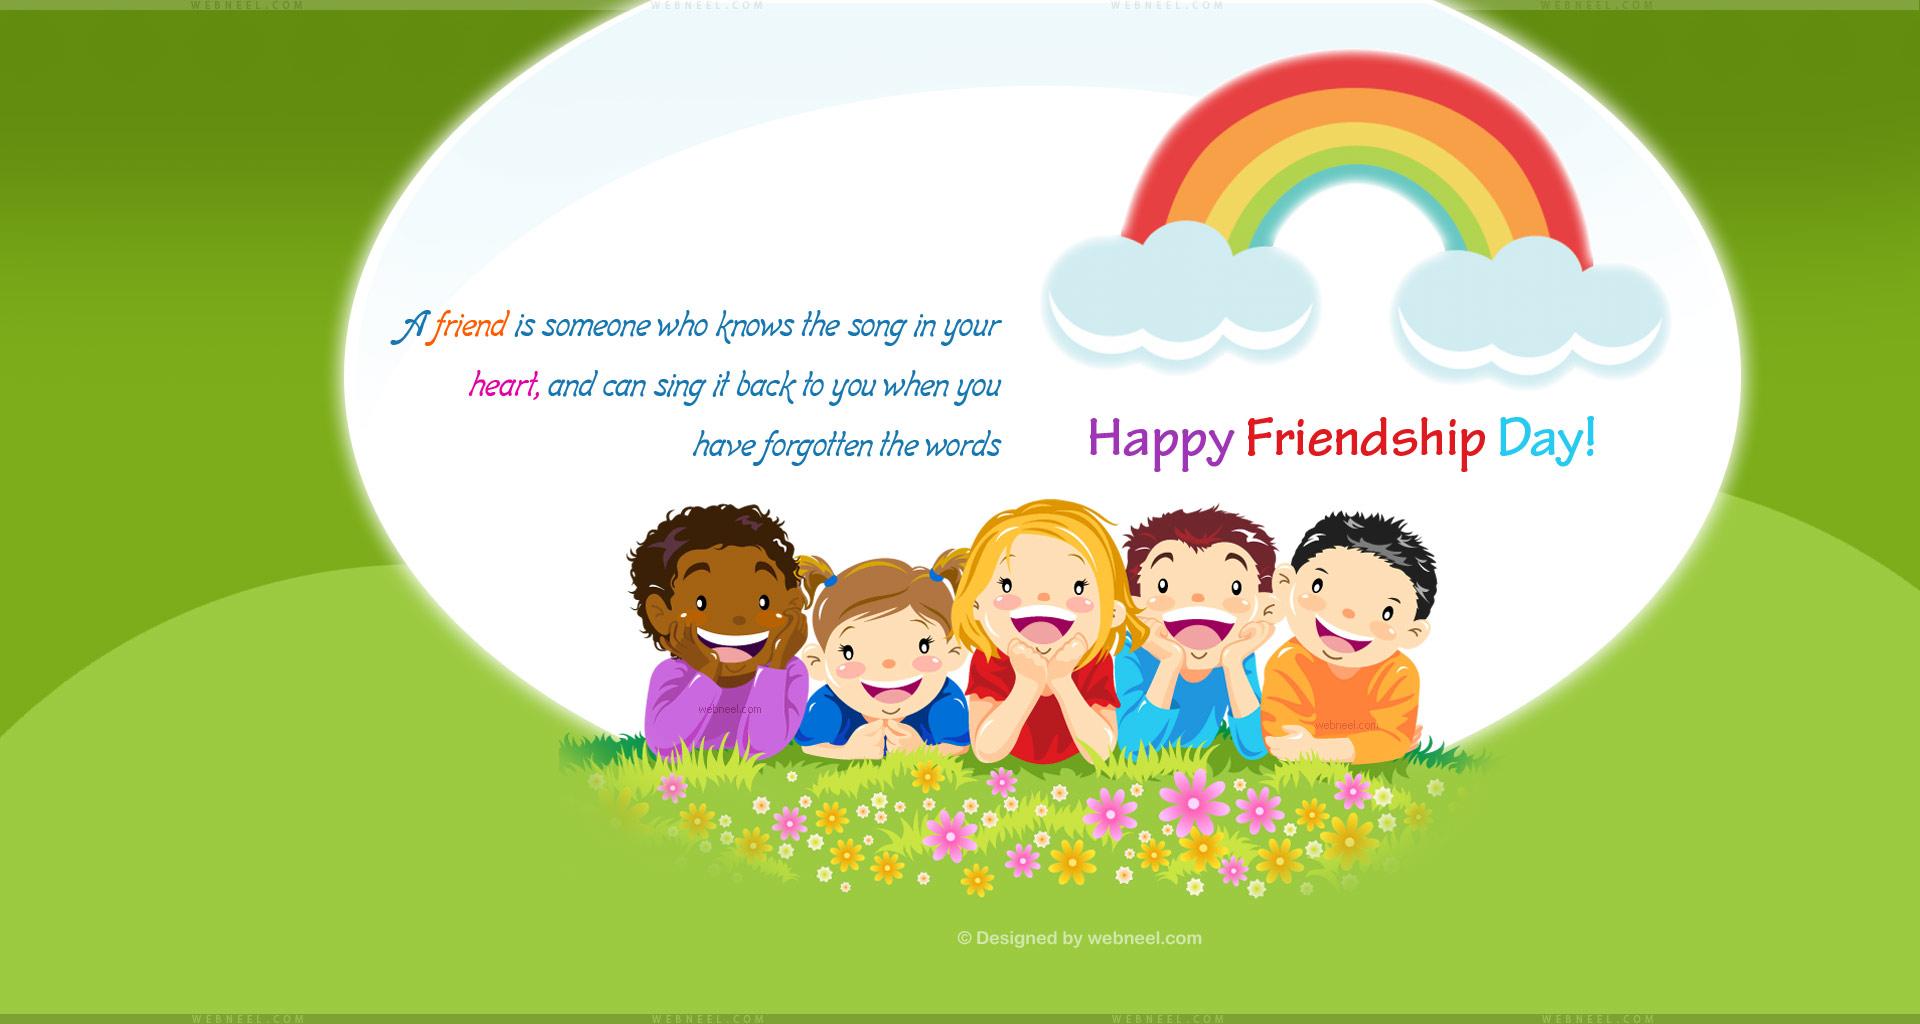 Creative Friendship Day Quotes and Wallpaper 2018